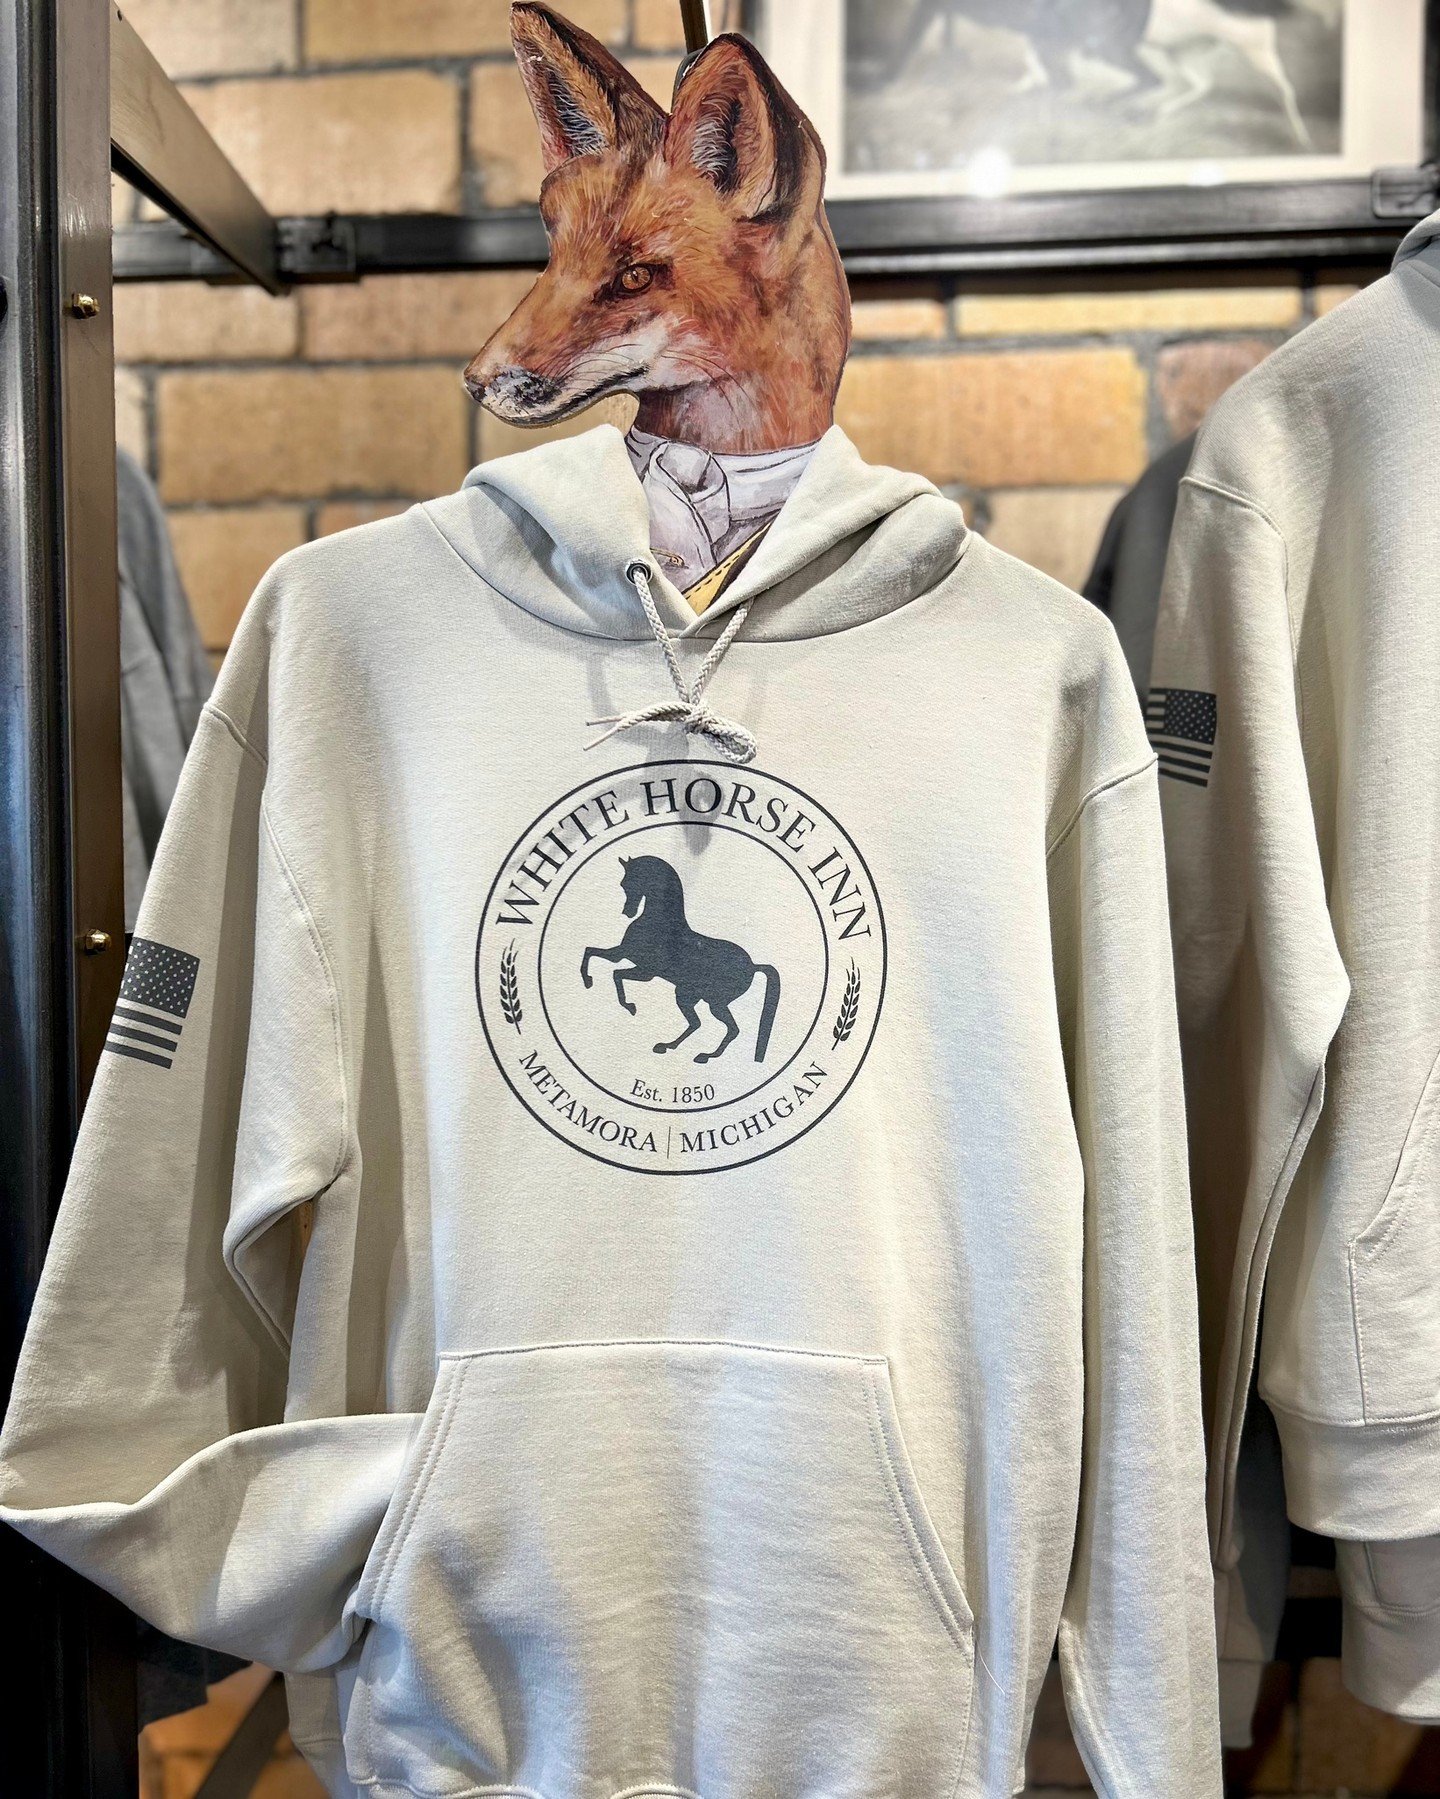 We are loving the newest @whitehorseinnmetamora sweatshirt design! It is also available in gray and navy.